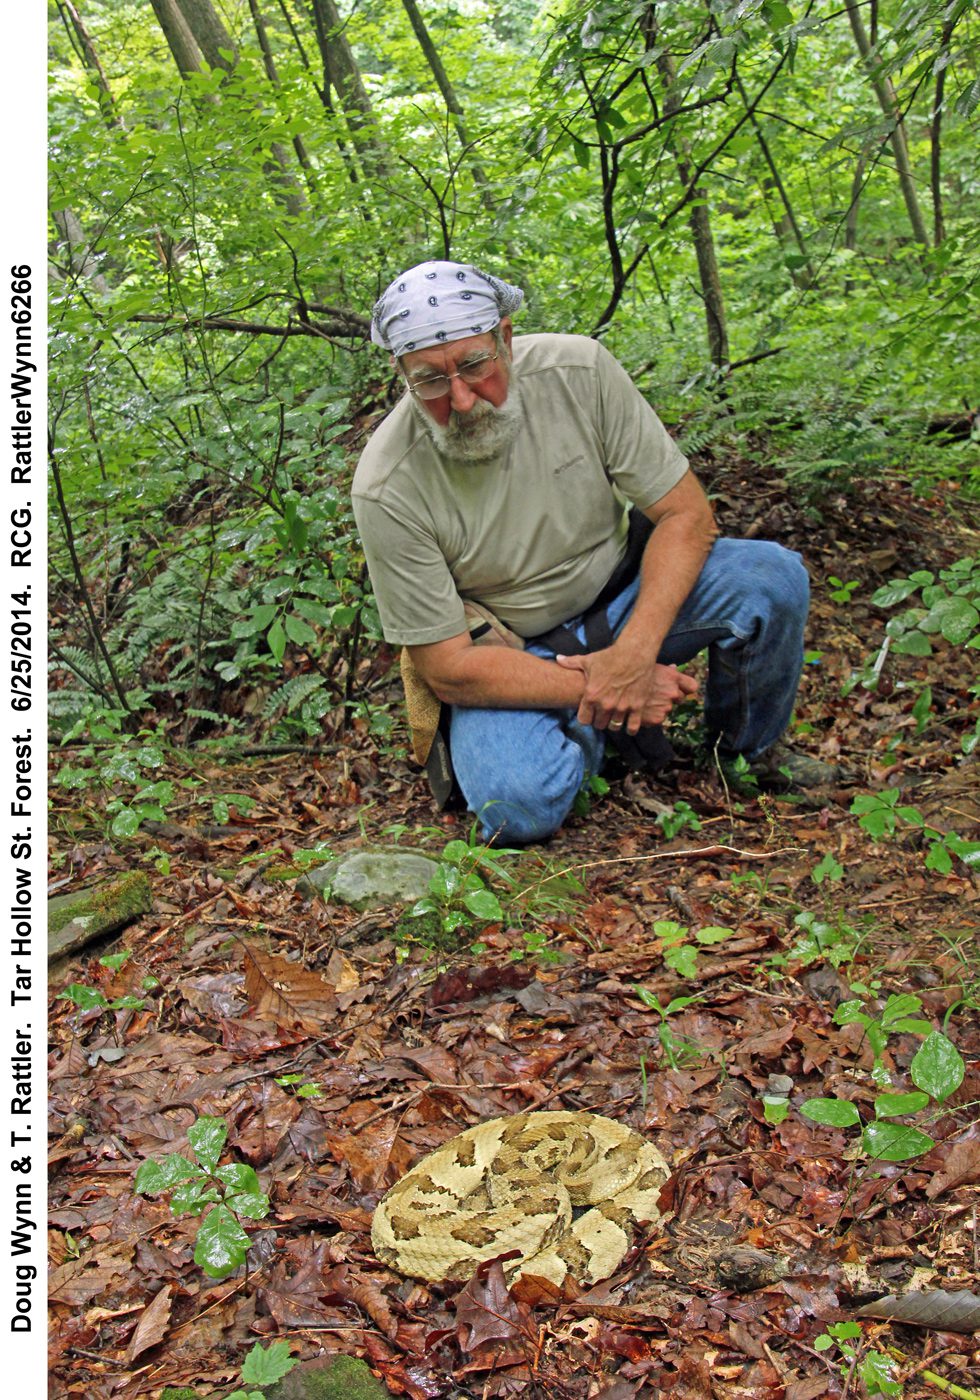 Herpetologist Doug Wynn with a Timber on a study site in southern Ohio.